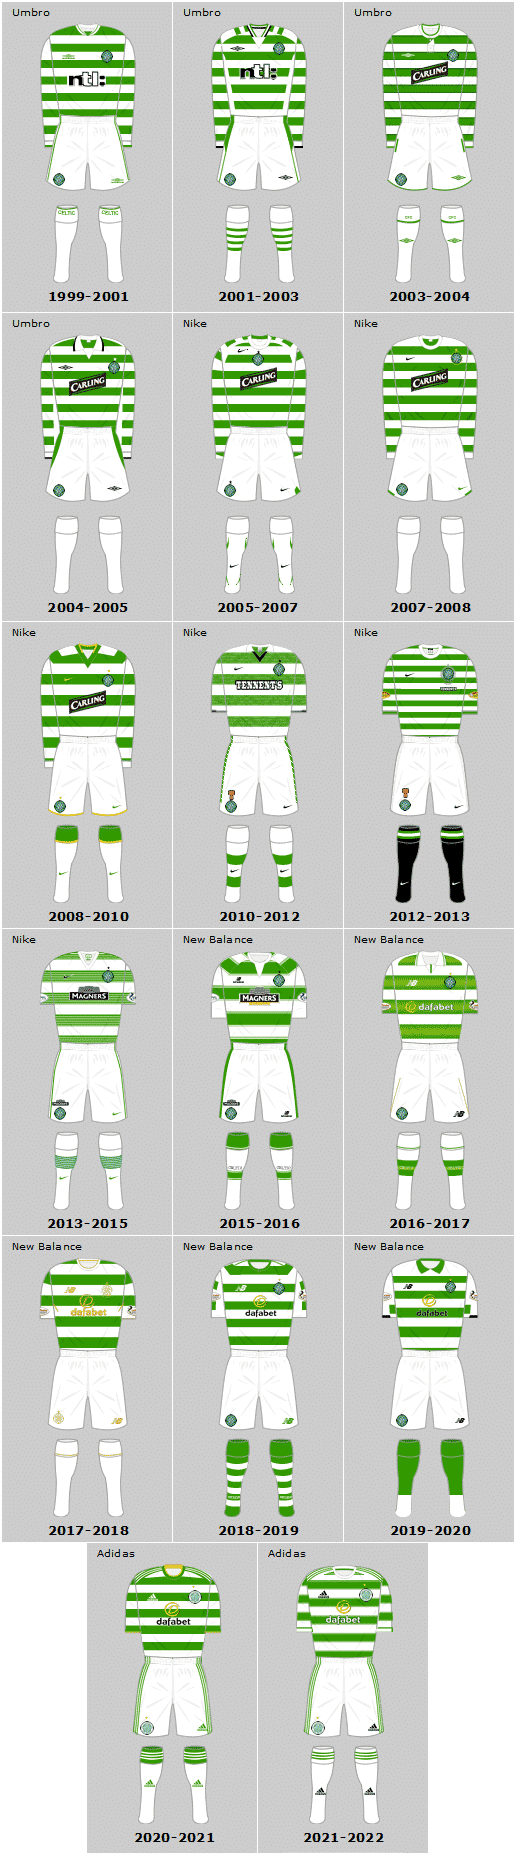 Celtic FC 21st Century Home Playing Kits